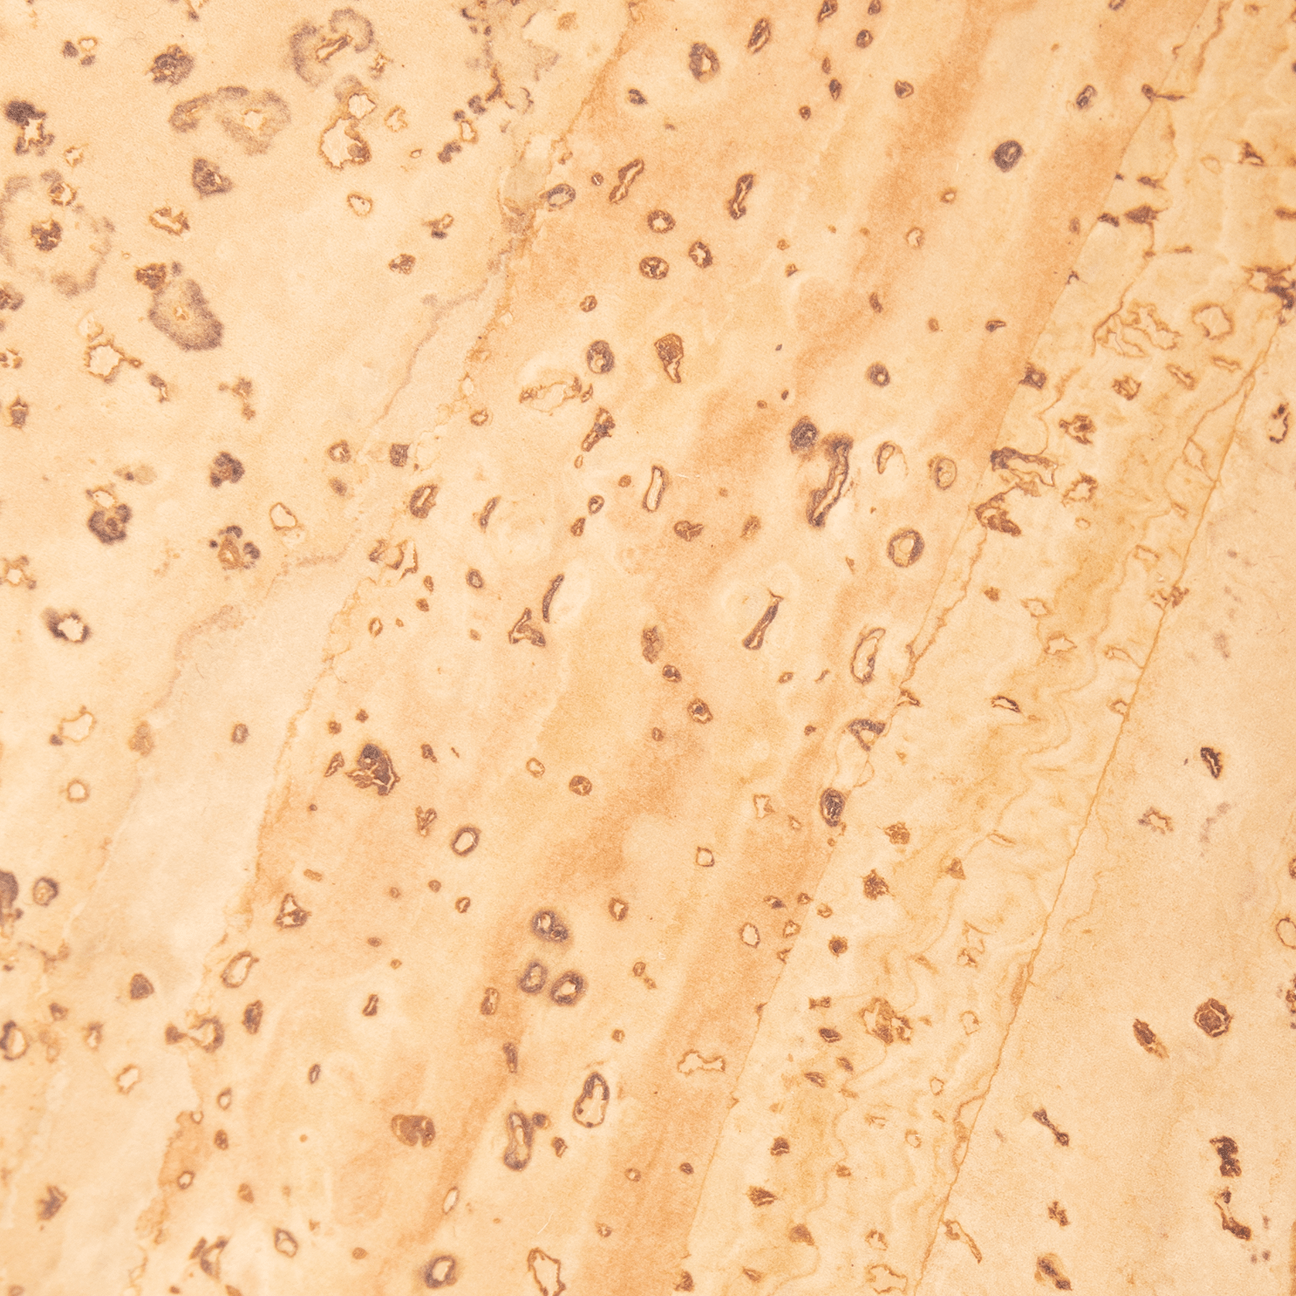 A close up view of the harmony pattern highlighting the natural variatiions of cork slices. 